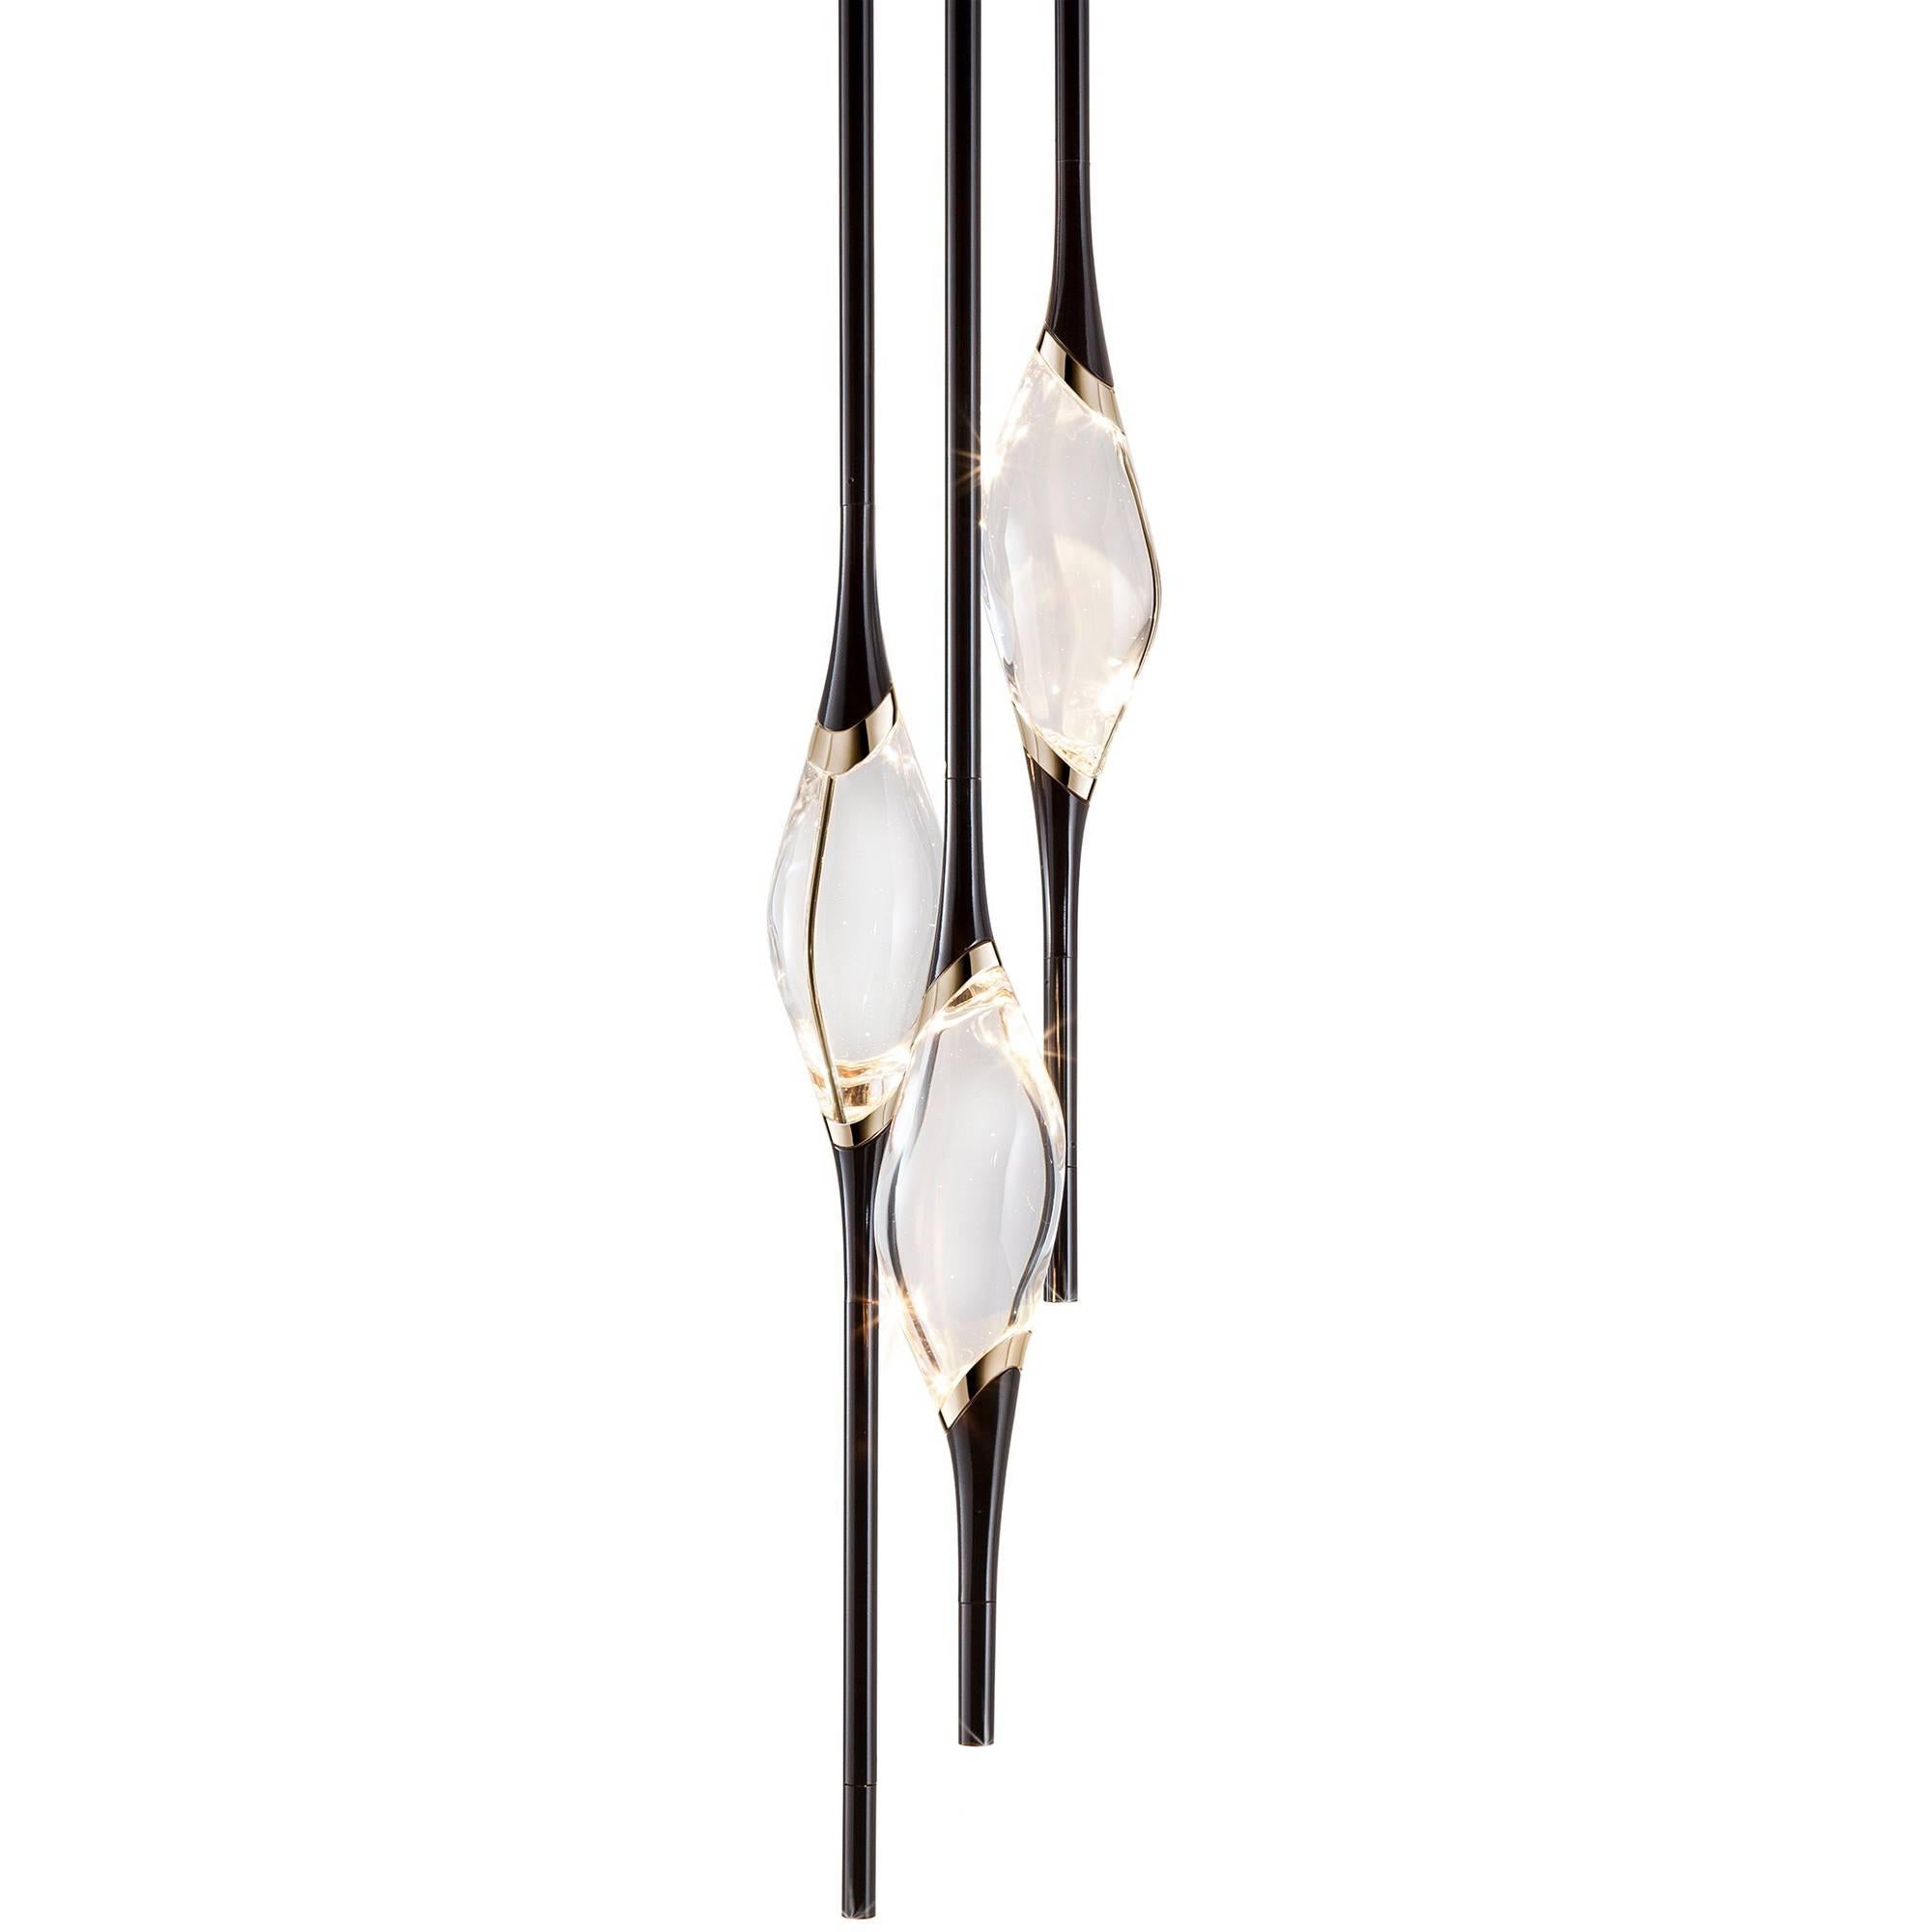 "Il Pezzo 12 Round Chandelier" - height 120cm/47.2" - black and polished brass en vente